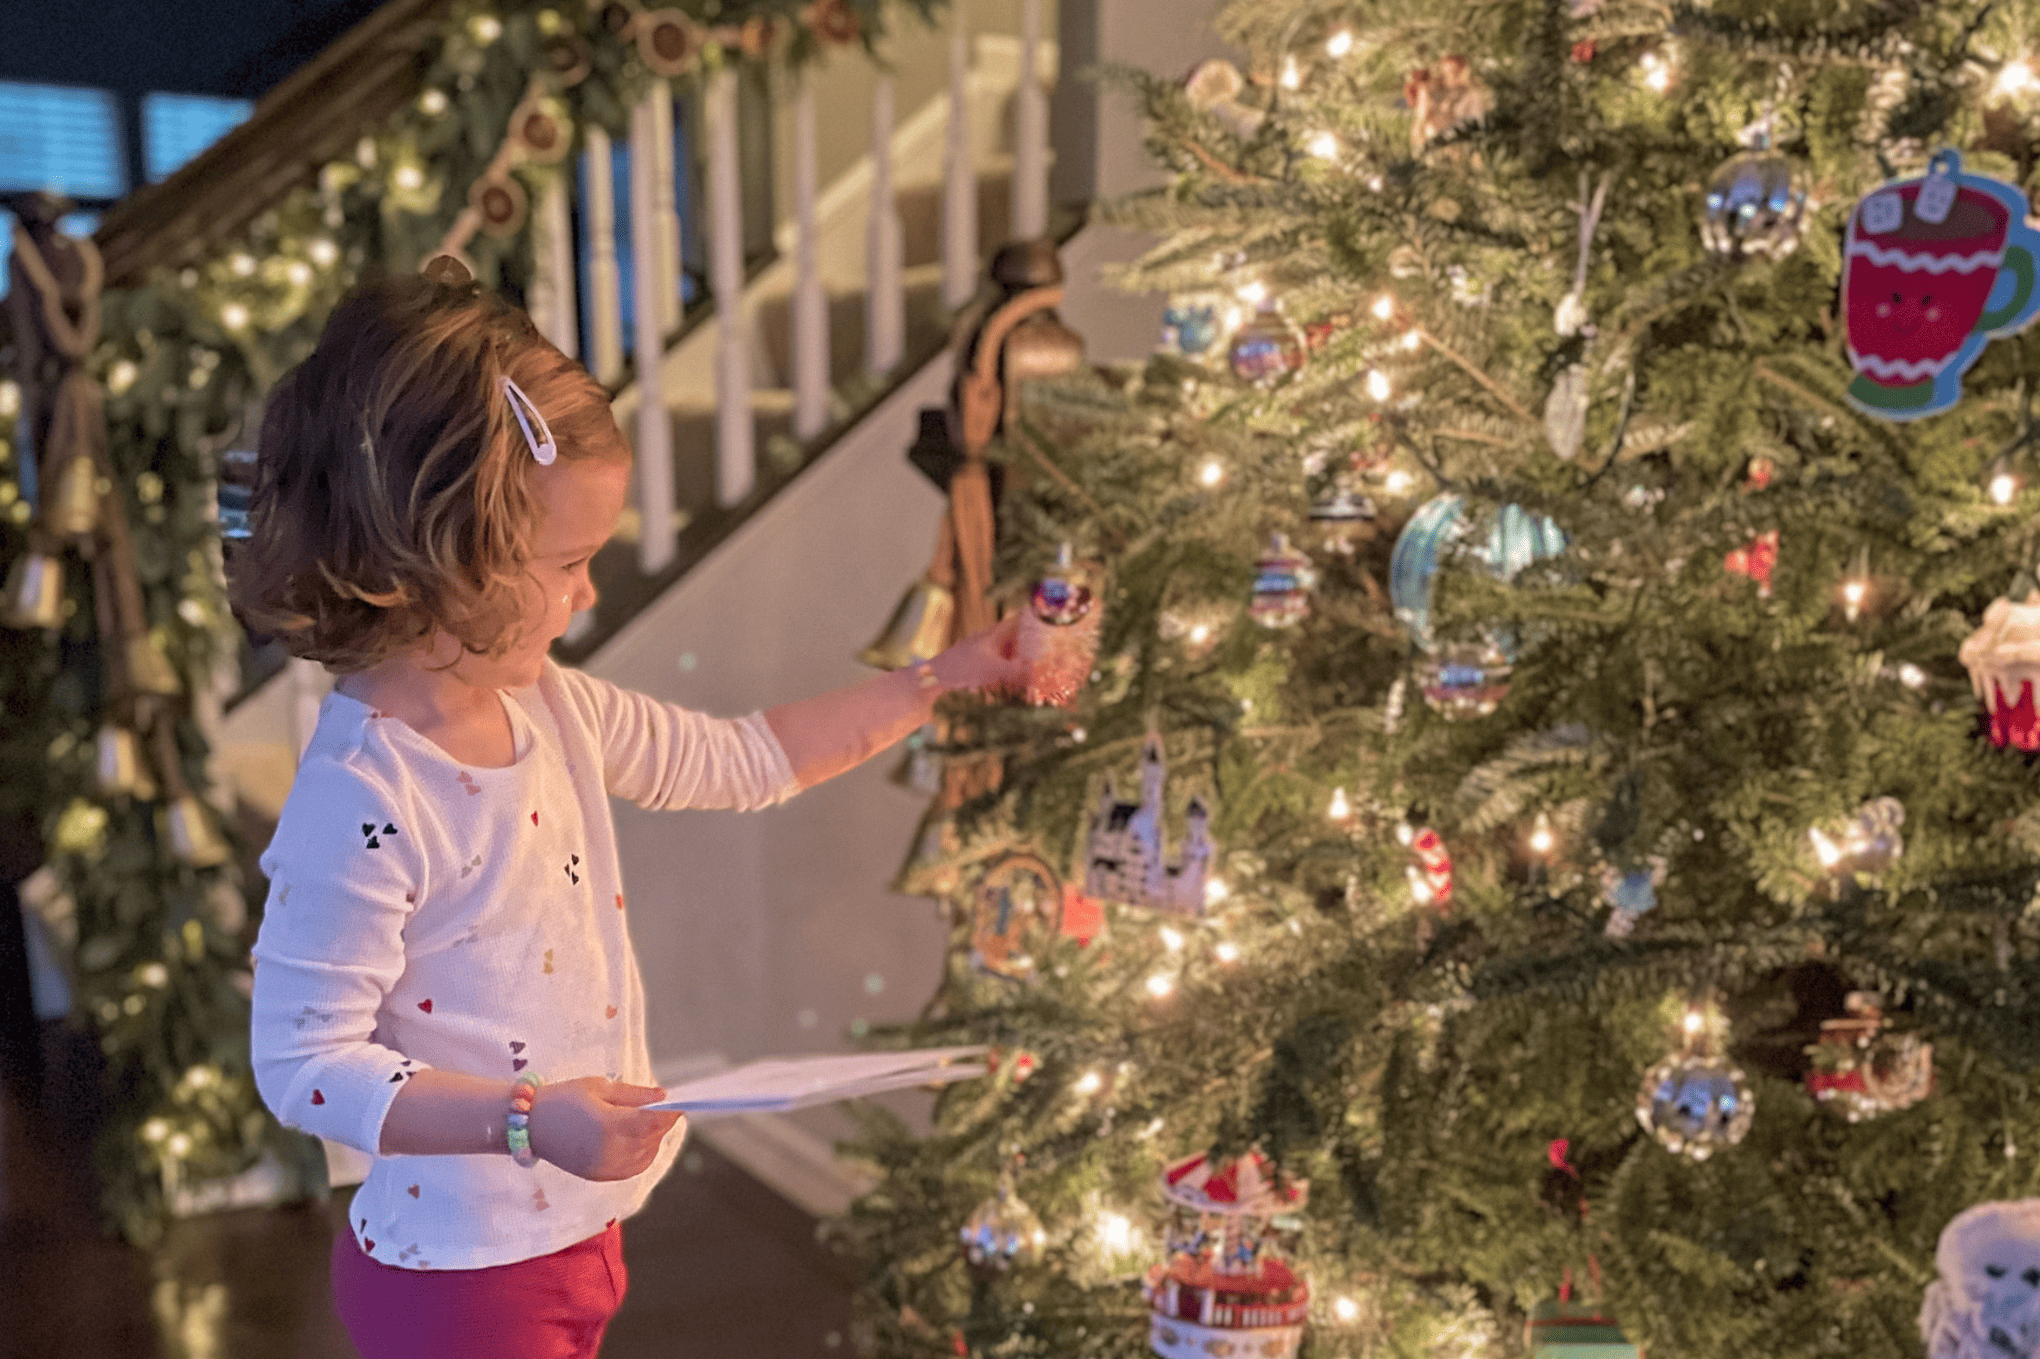 The Best Family Christmas Movies for Preschoolers and Kids